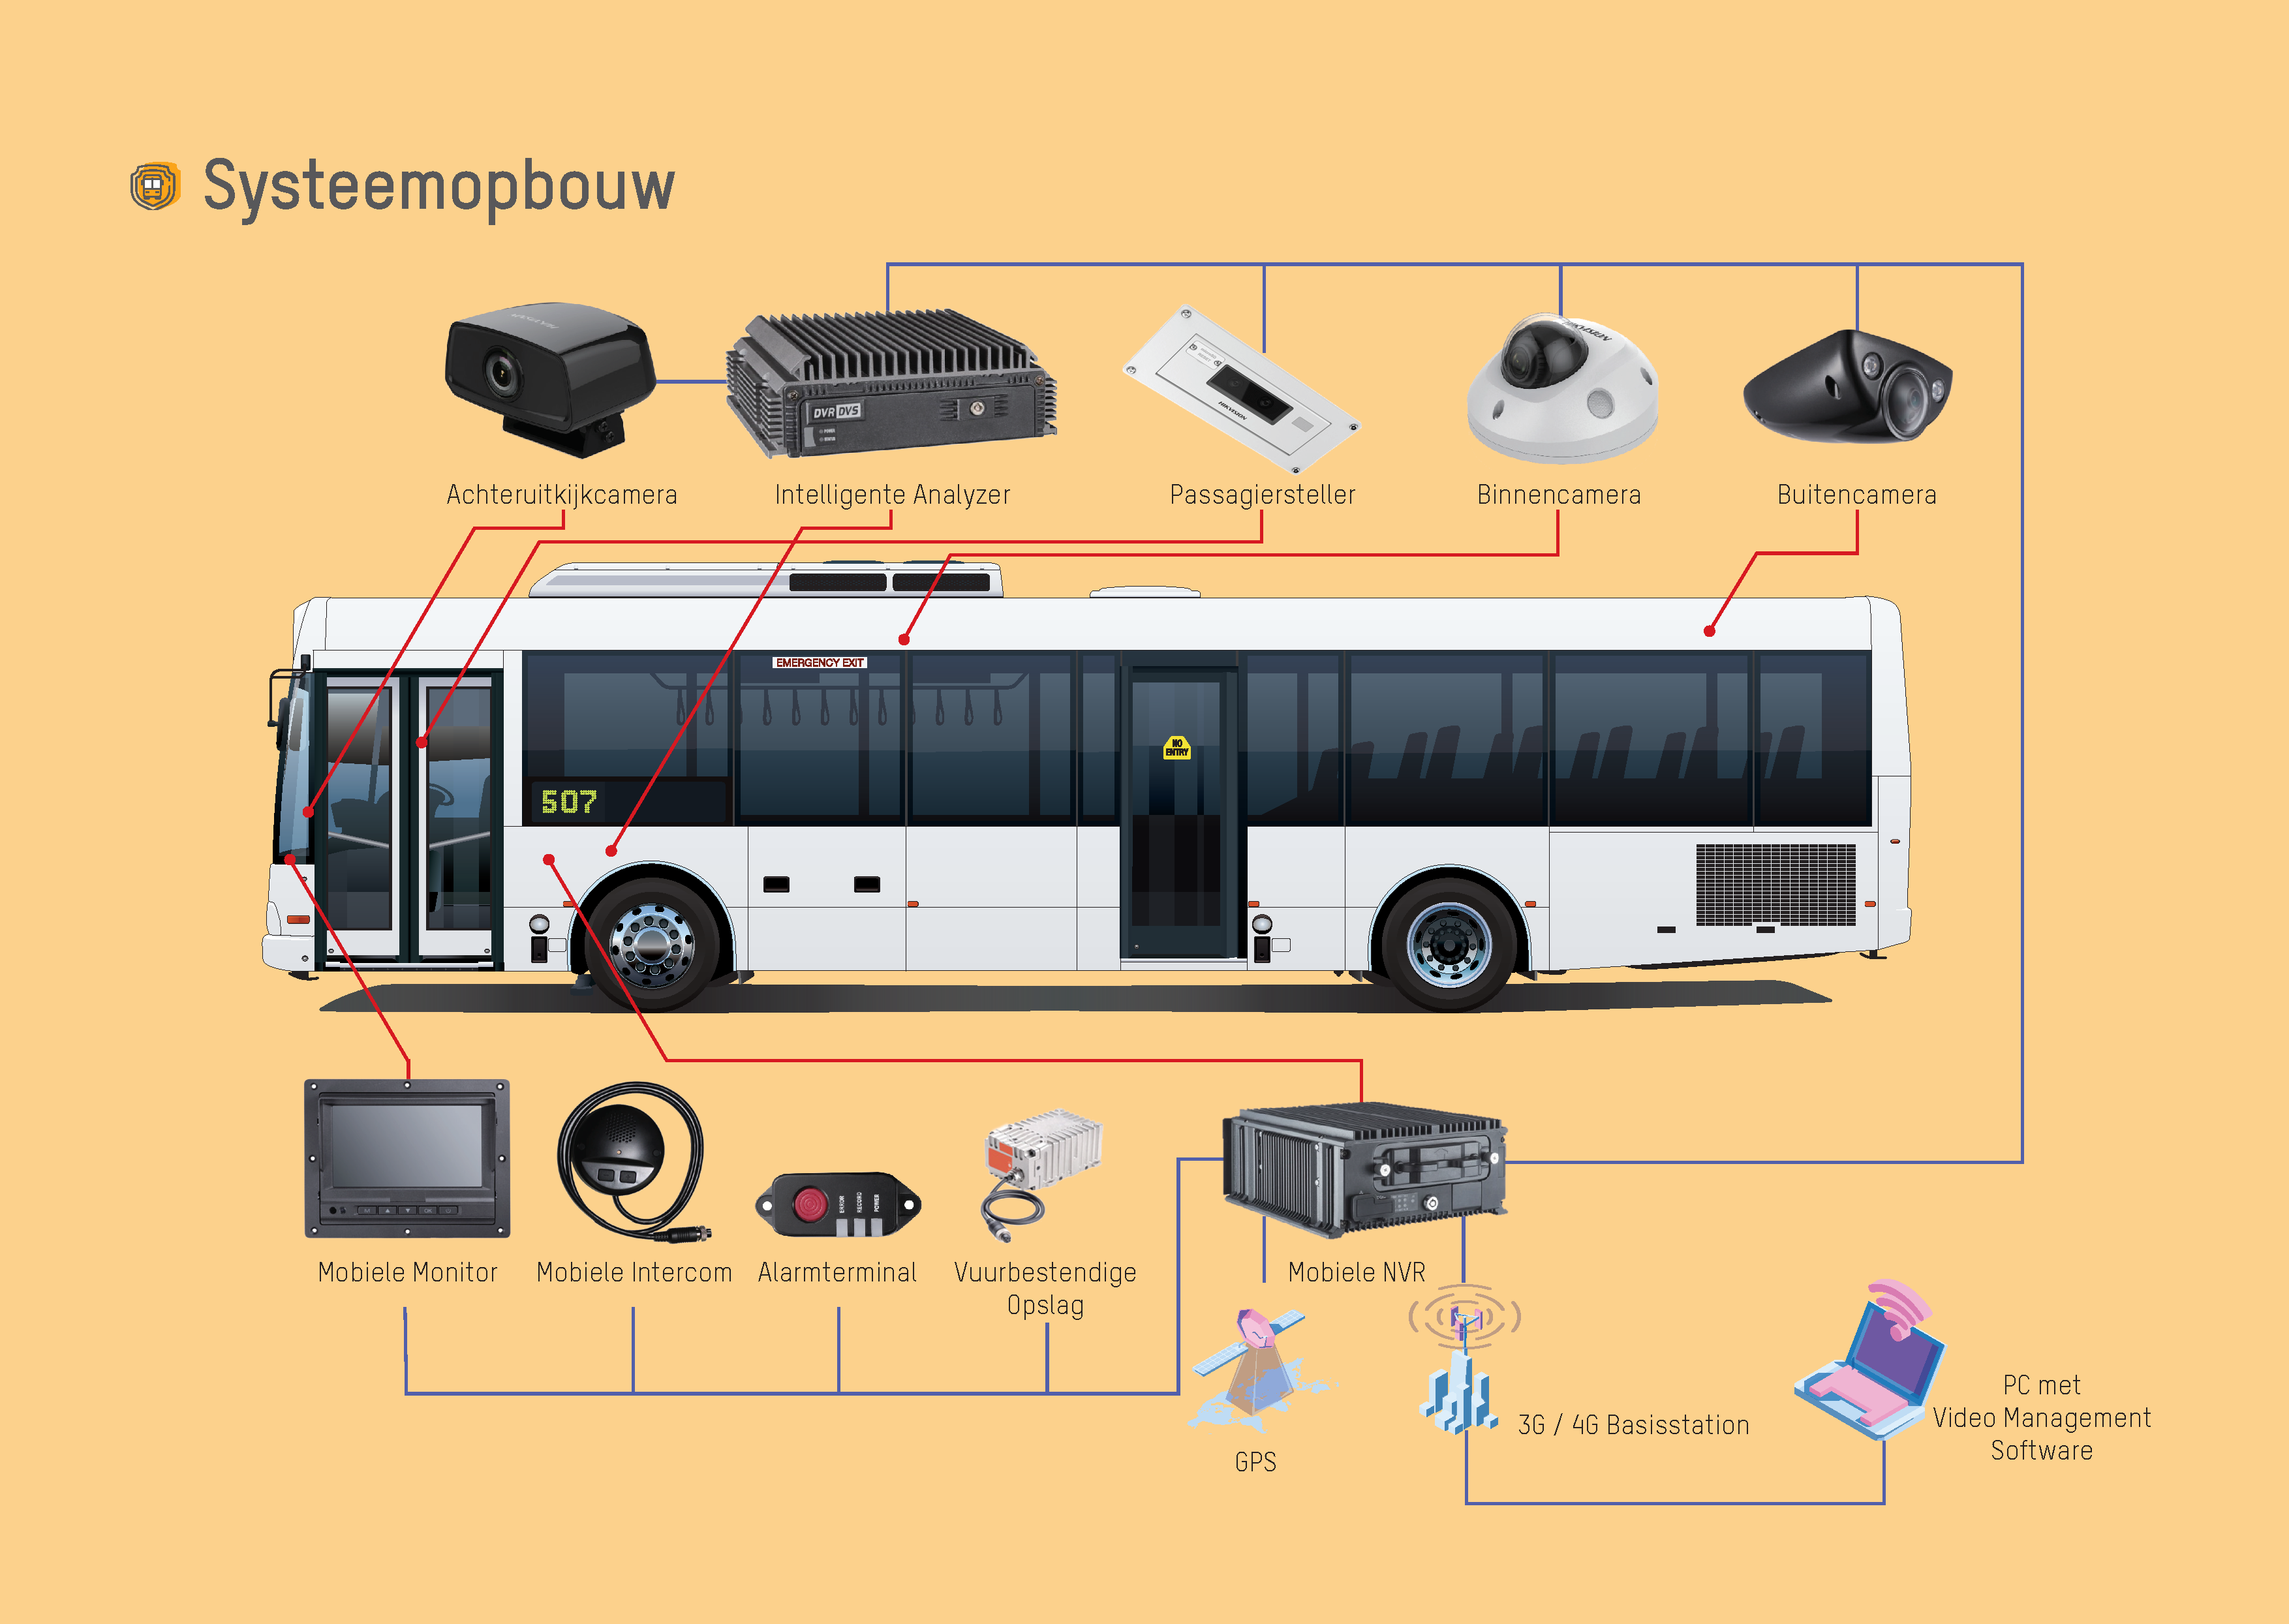 Systeemopbouw in bus (foto: Hikvision)